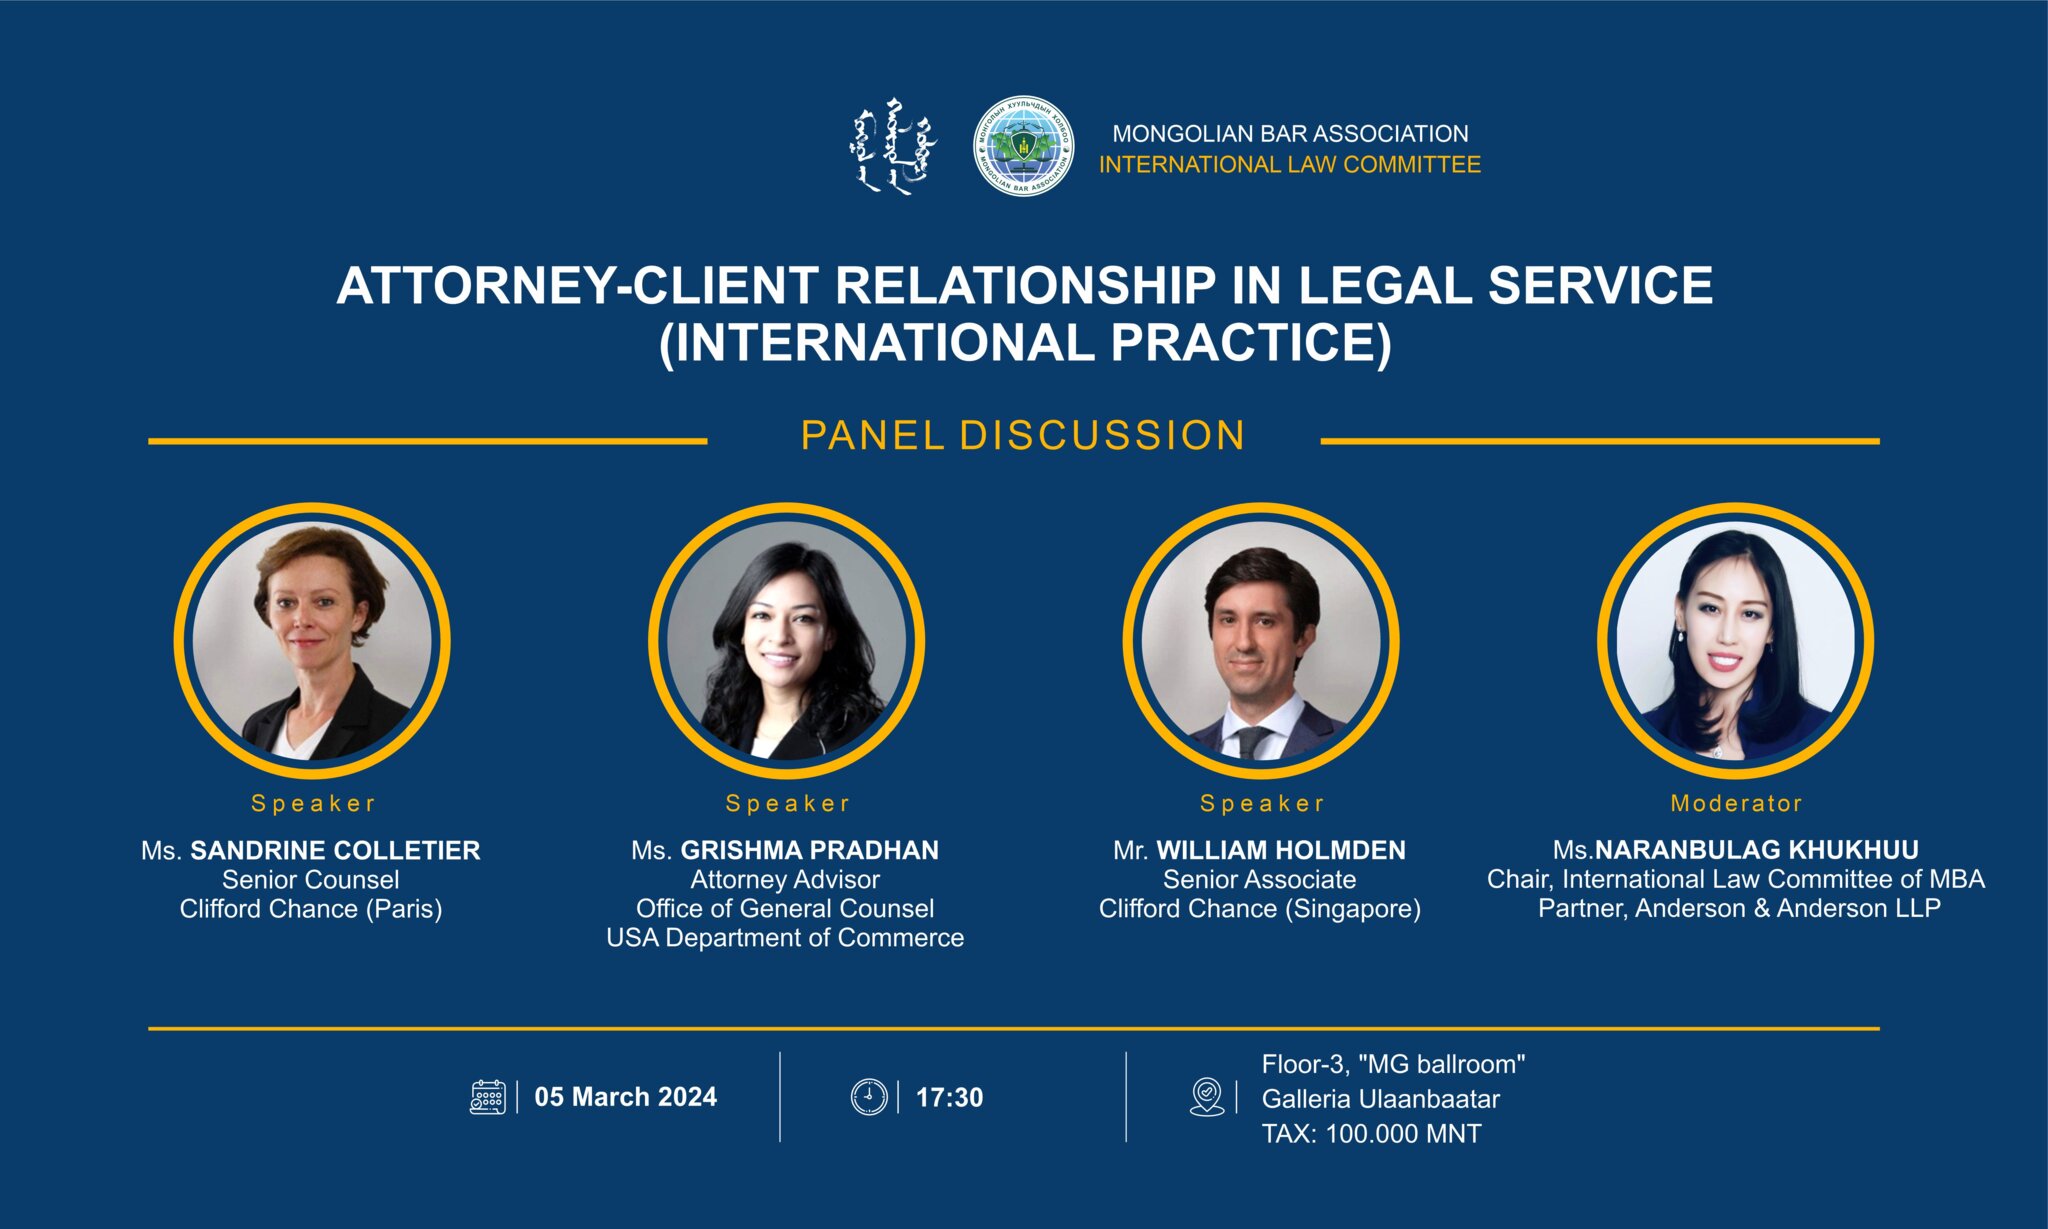 ATTORNEY-CLIENT RELATIONSHIP IN LEGAL SERVICE  (INTERNATIONAL PRACTICE)